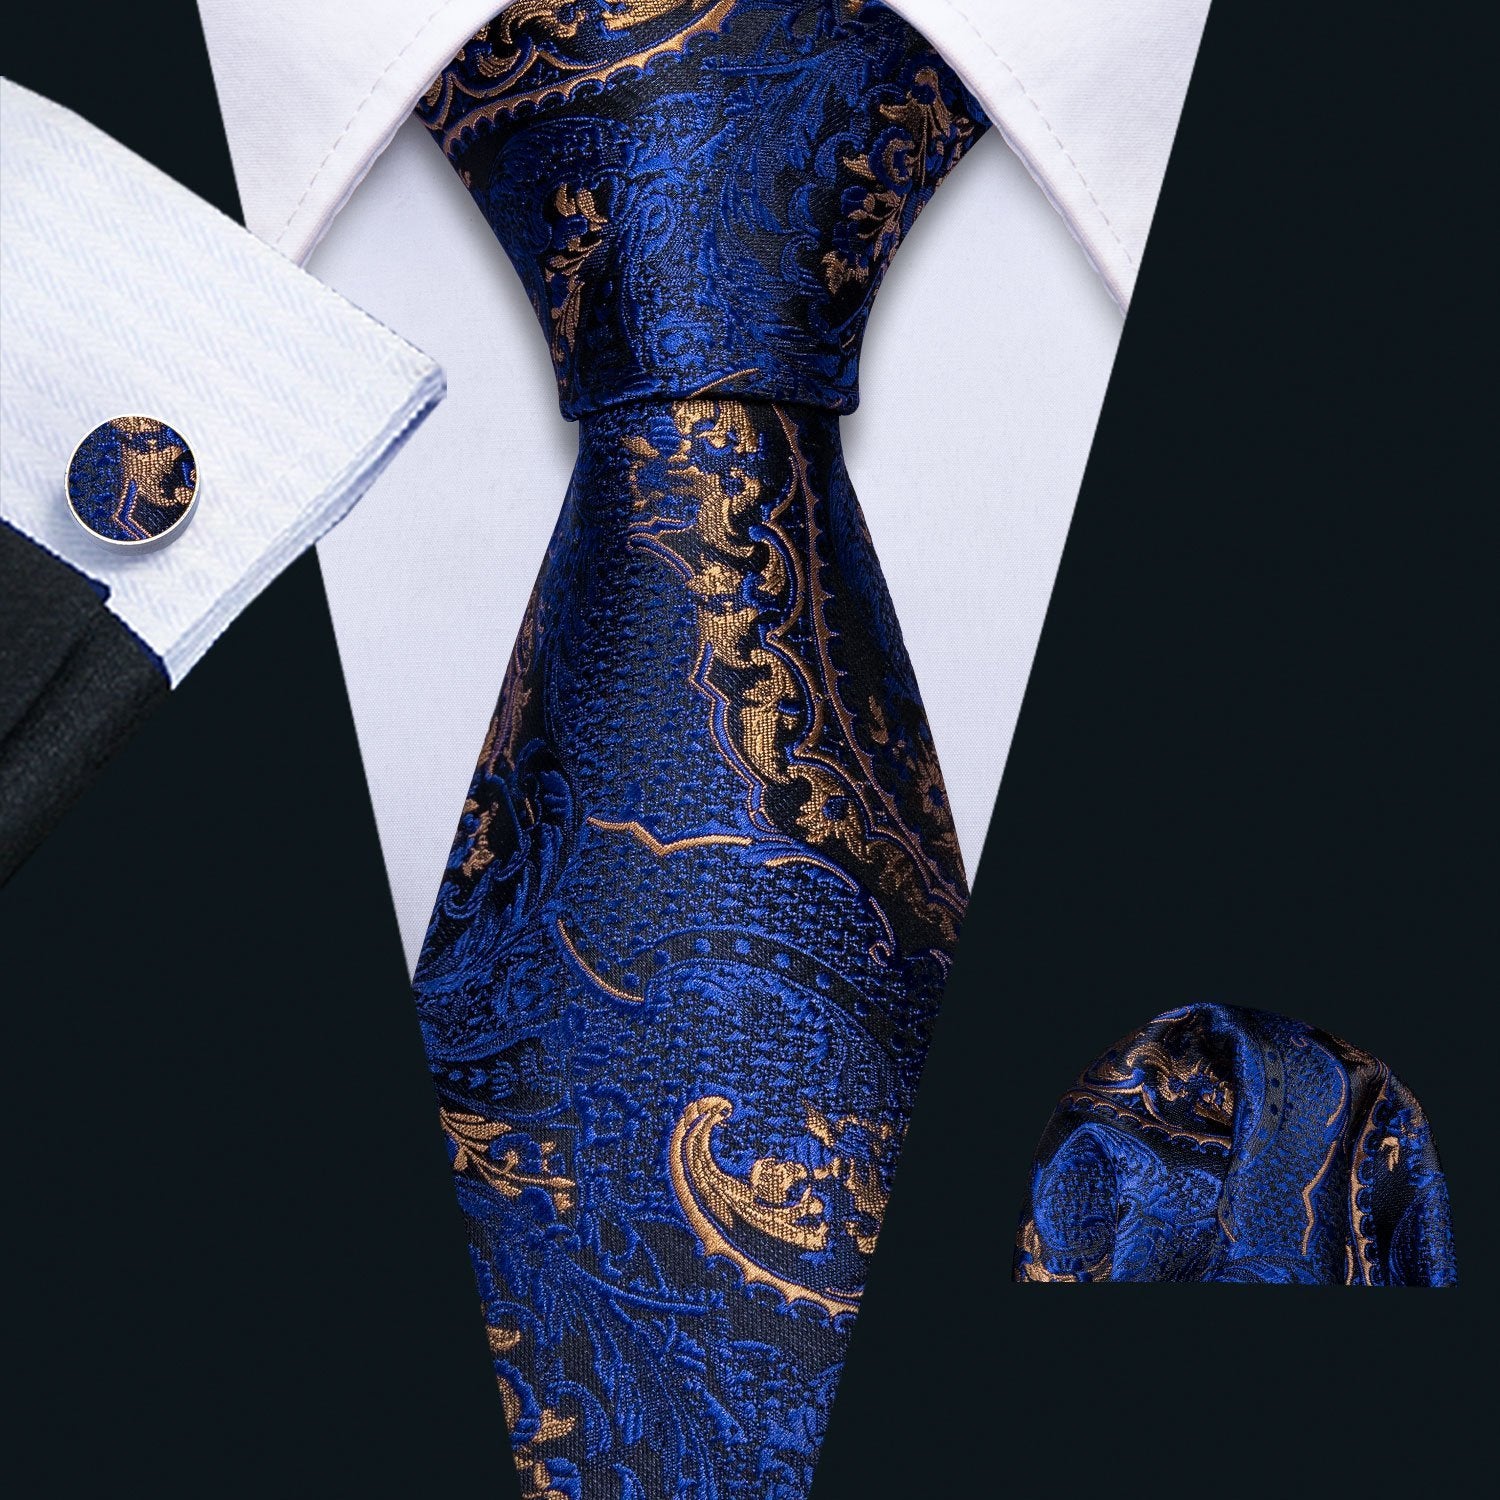 New Luxury Blue Golden Paisley Scarf with Tie Set